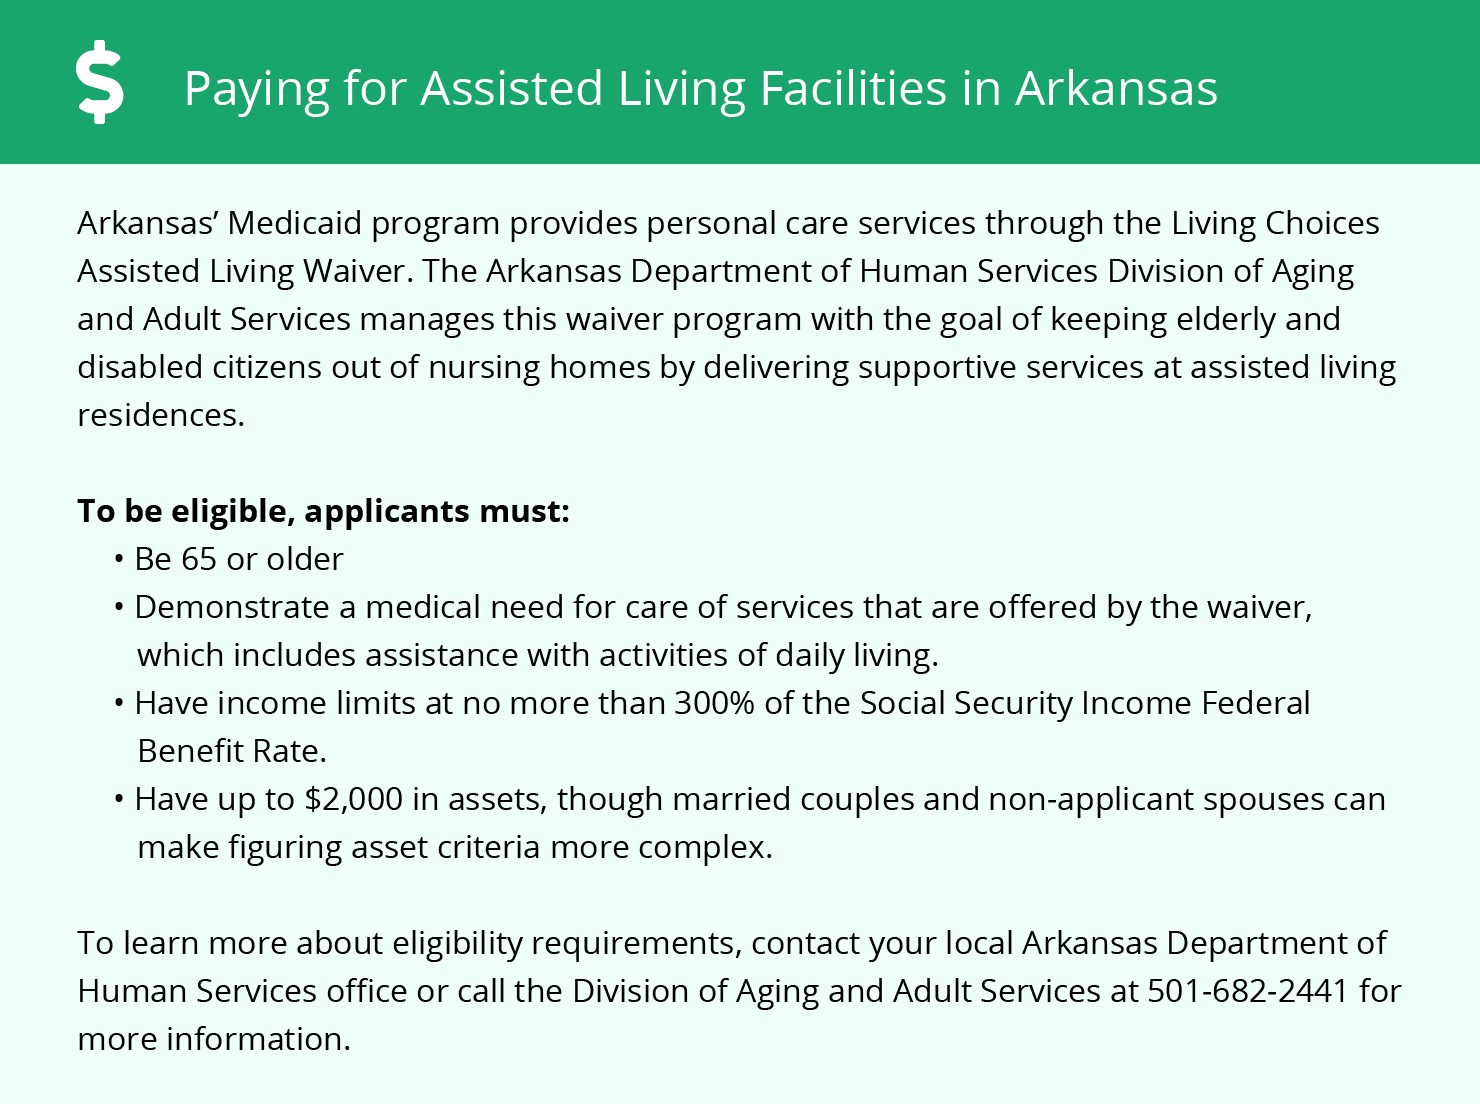 Paying for Assisted Living in Arkansas